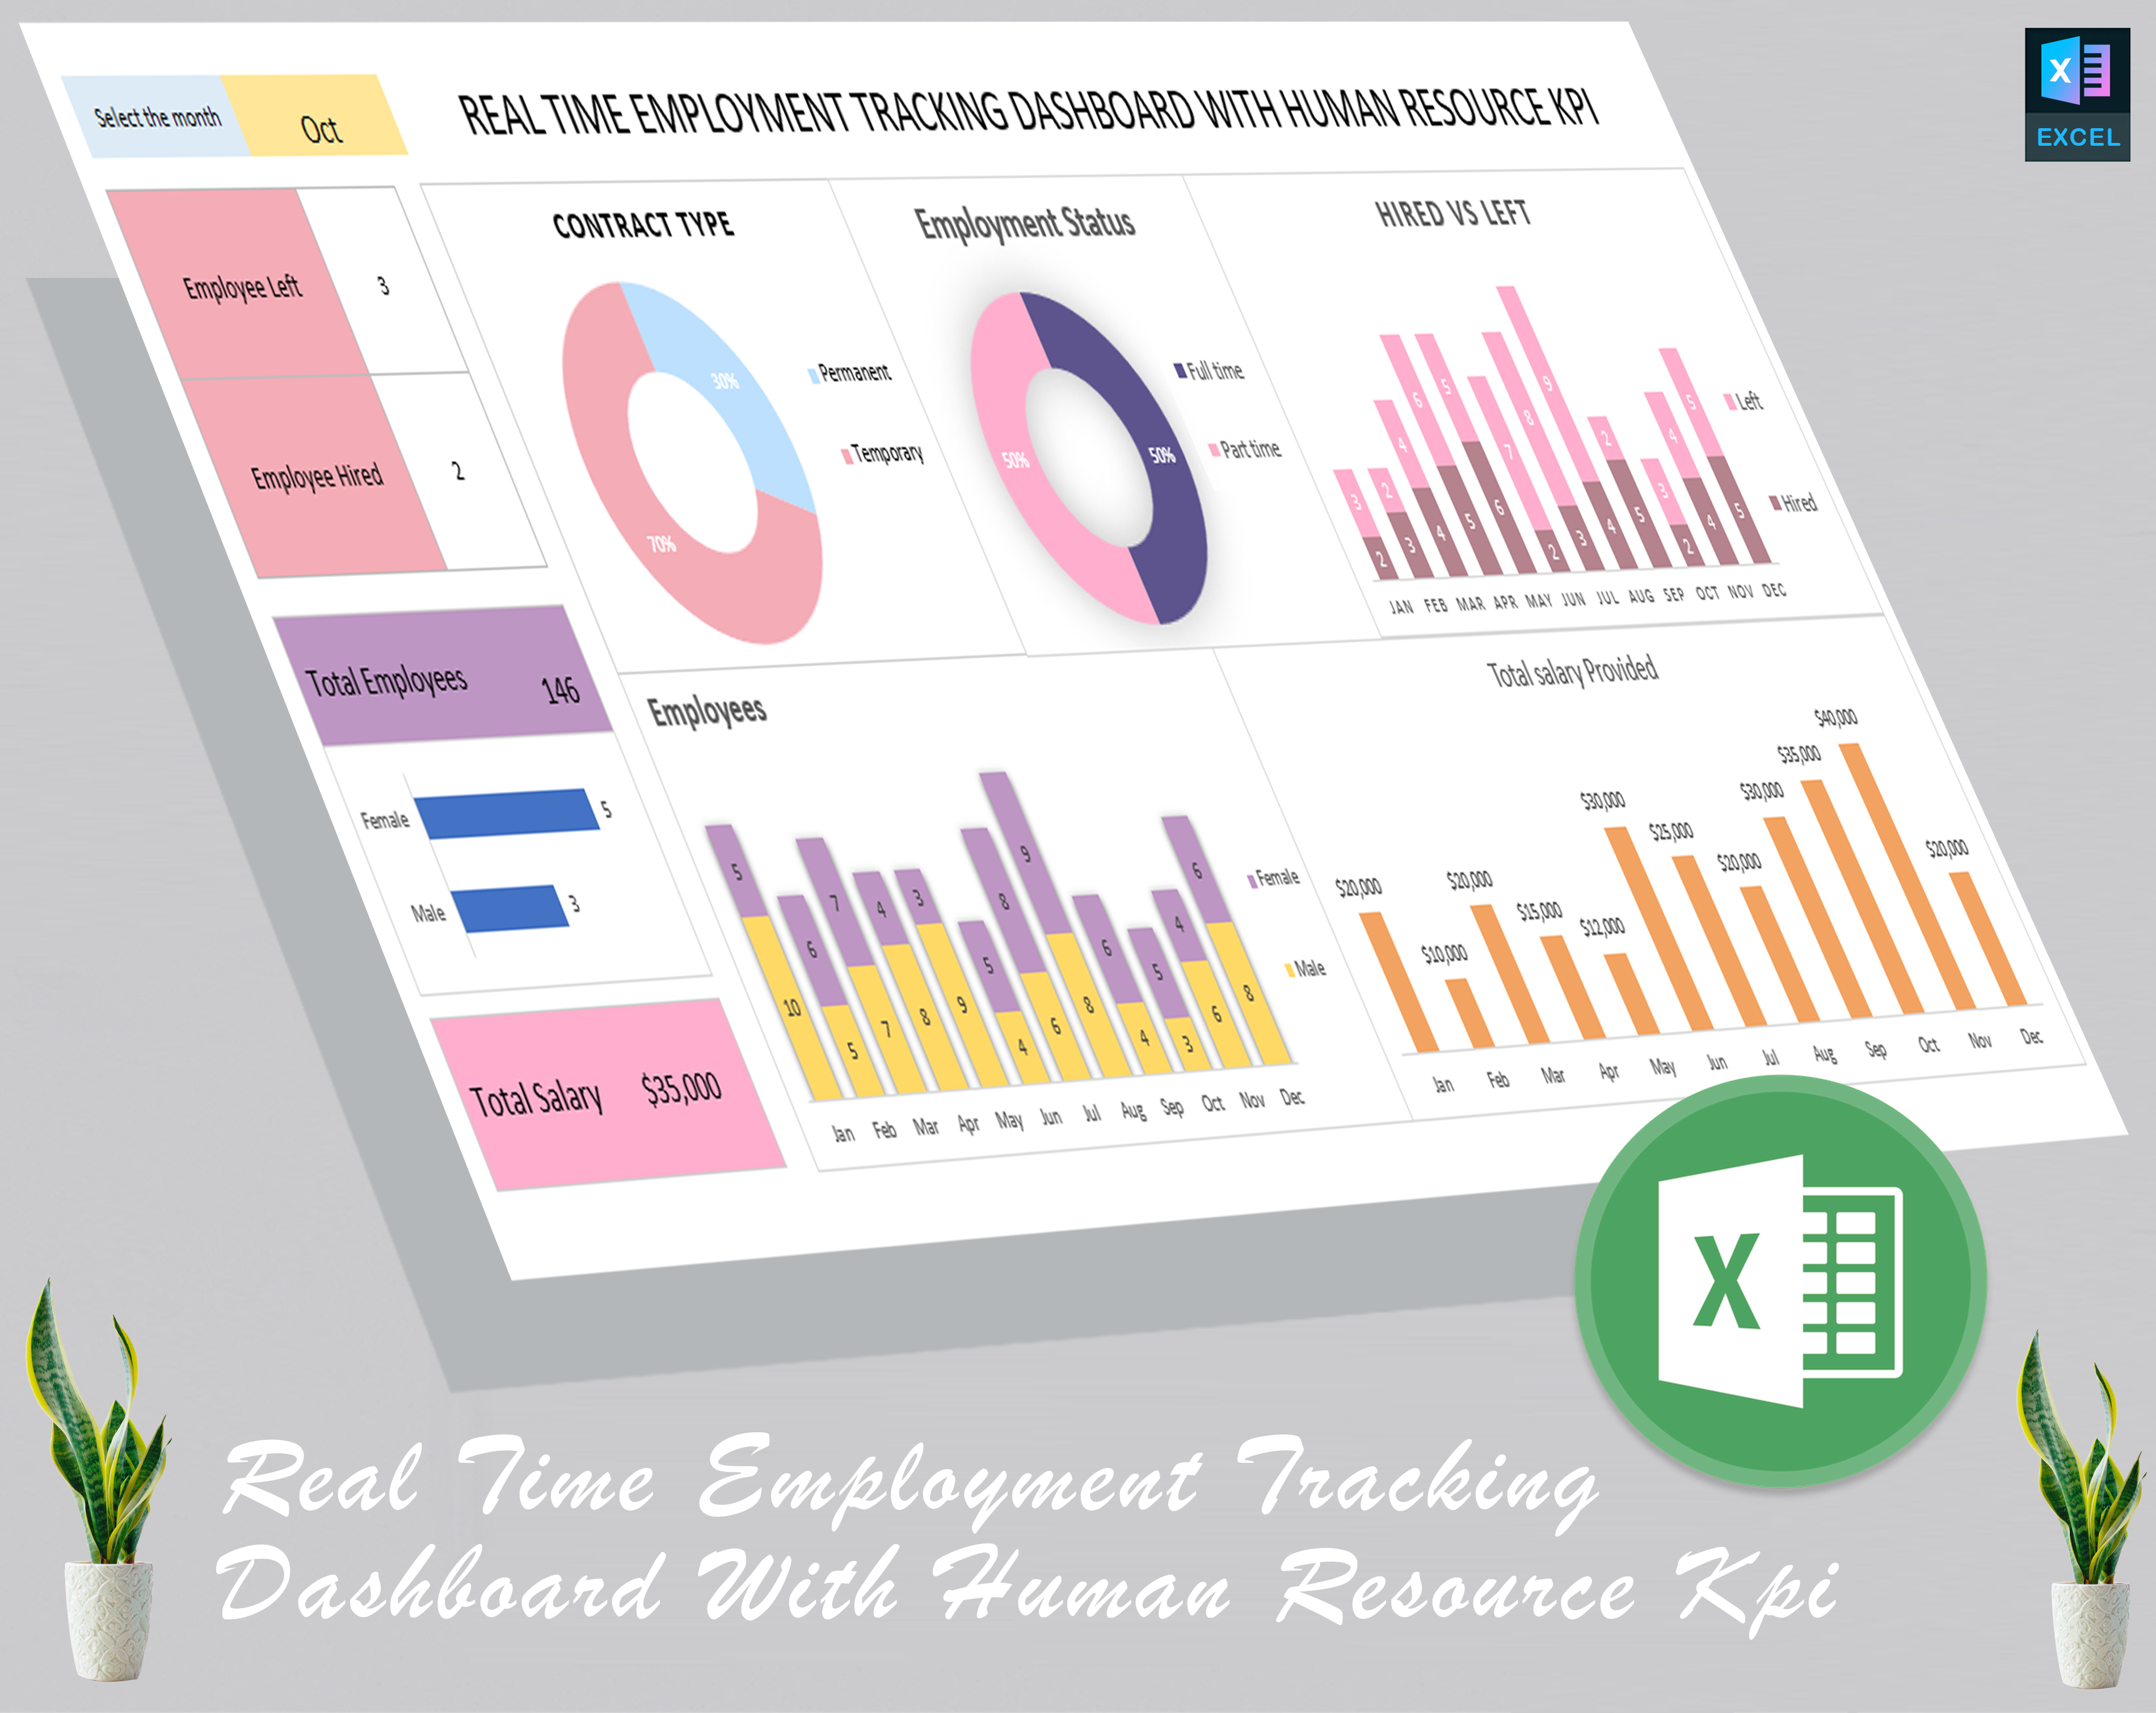 REAL TIME EMPLOYMENT TRACKING DASHBOARD